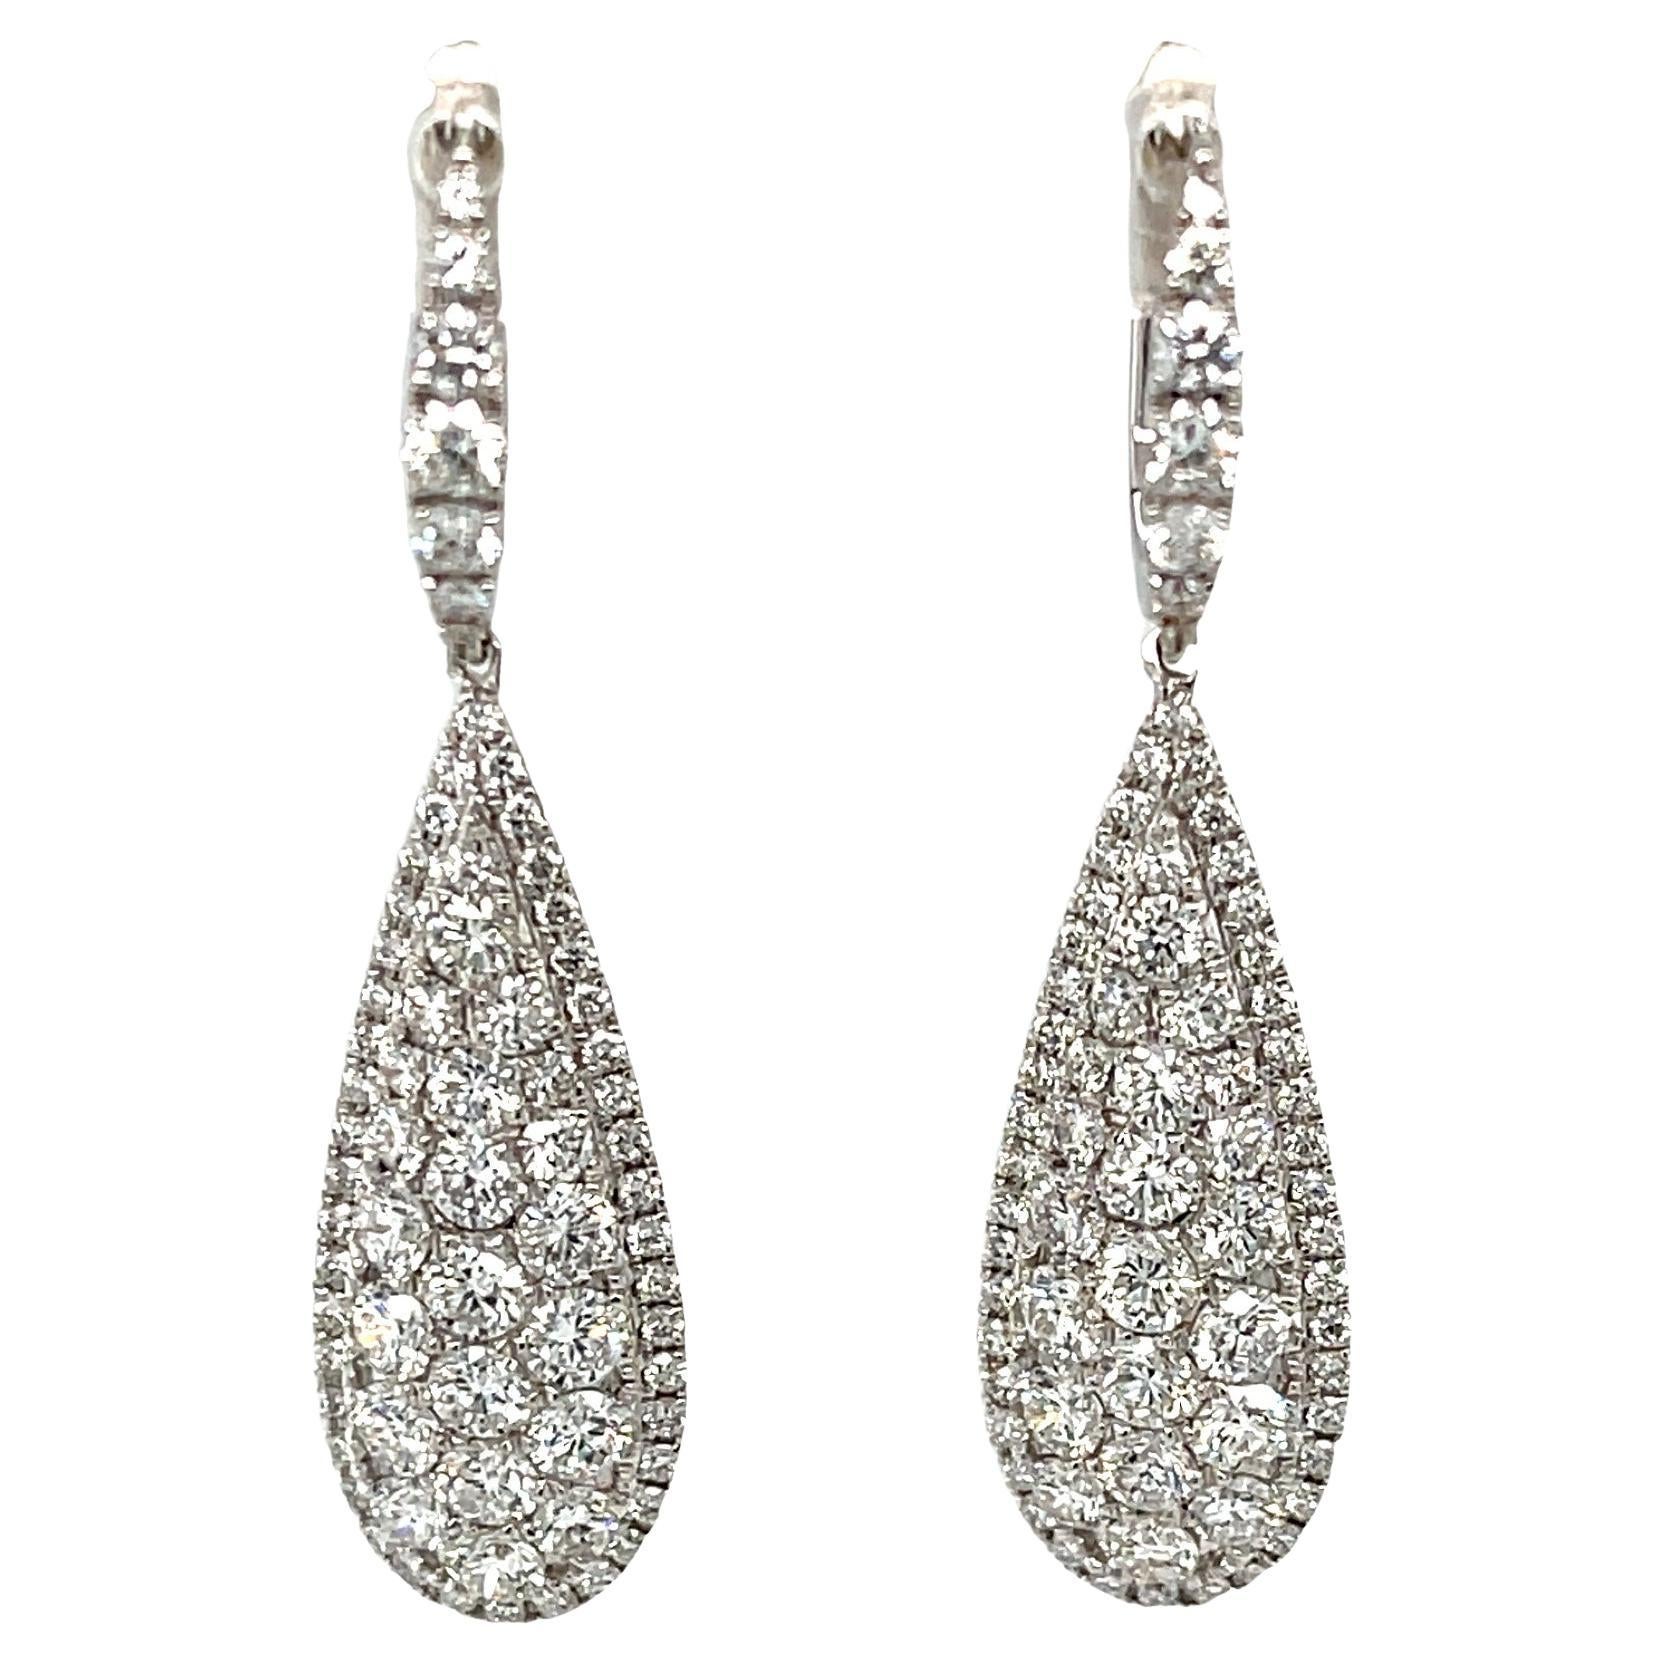 Diamond and 18k White Gold Teardrop Dangle Earrings, 3.15 Carats Total For Sale